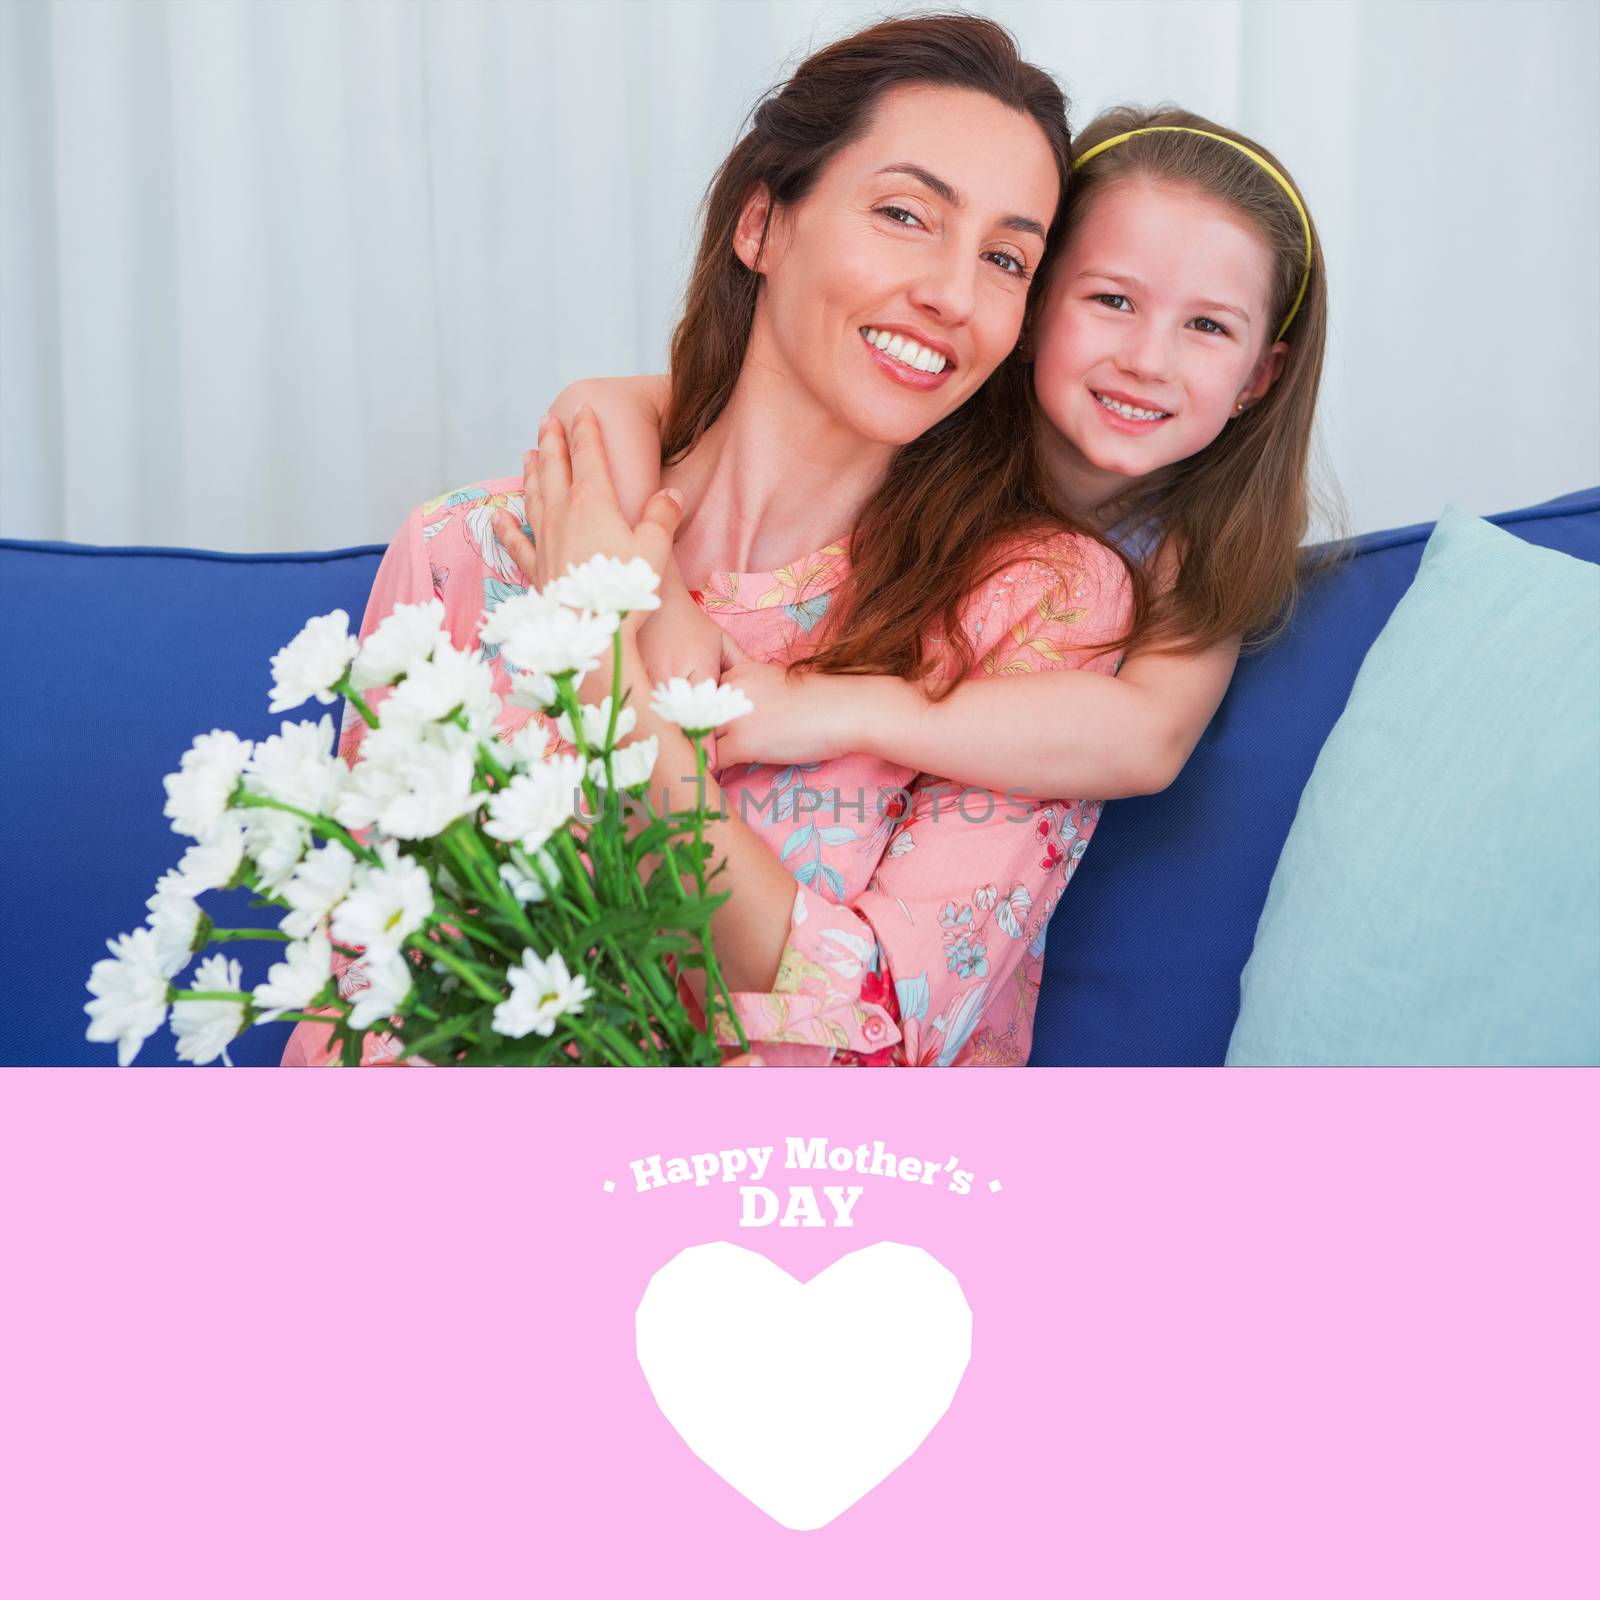 Composite image of happy mothers day by Wavebreakmedia